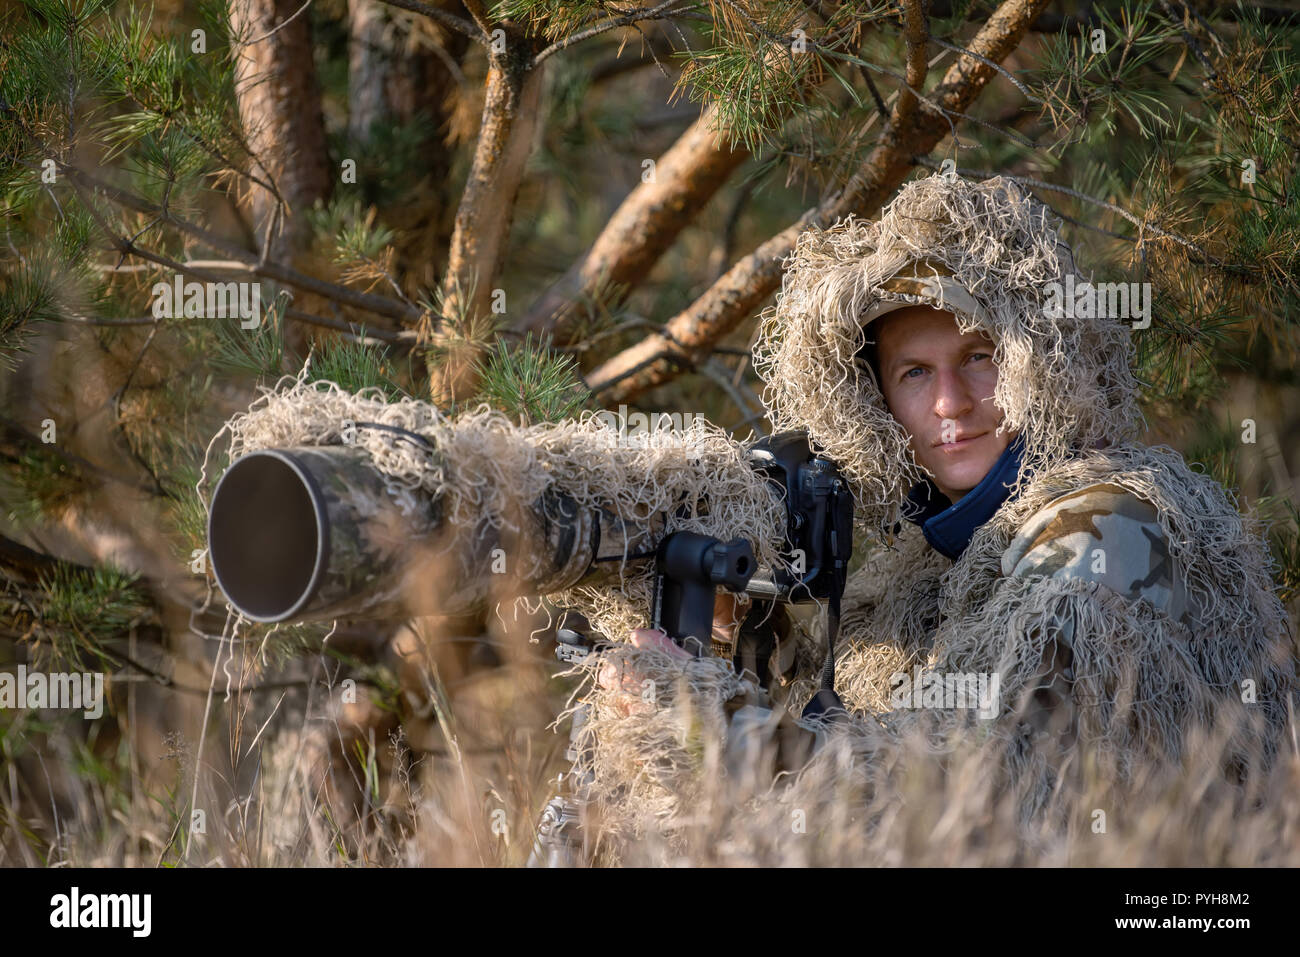 Camouflage wildlife photographer in the ghillie suit working in the wild Stock Photo